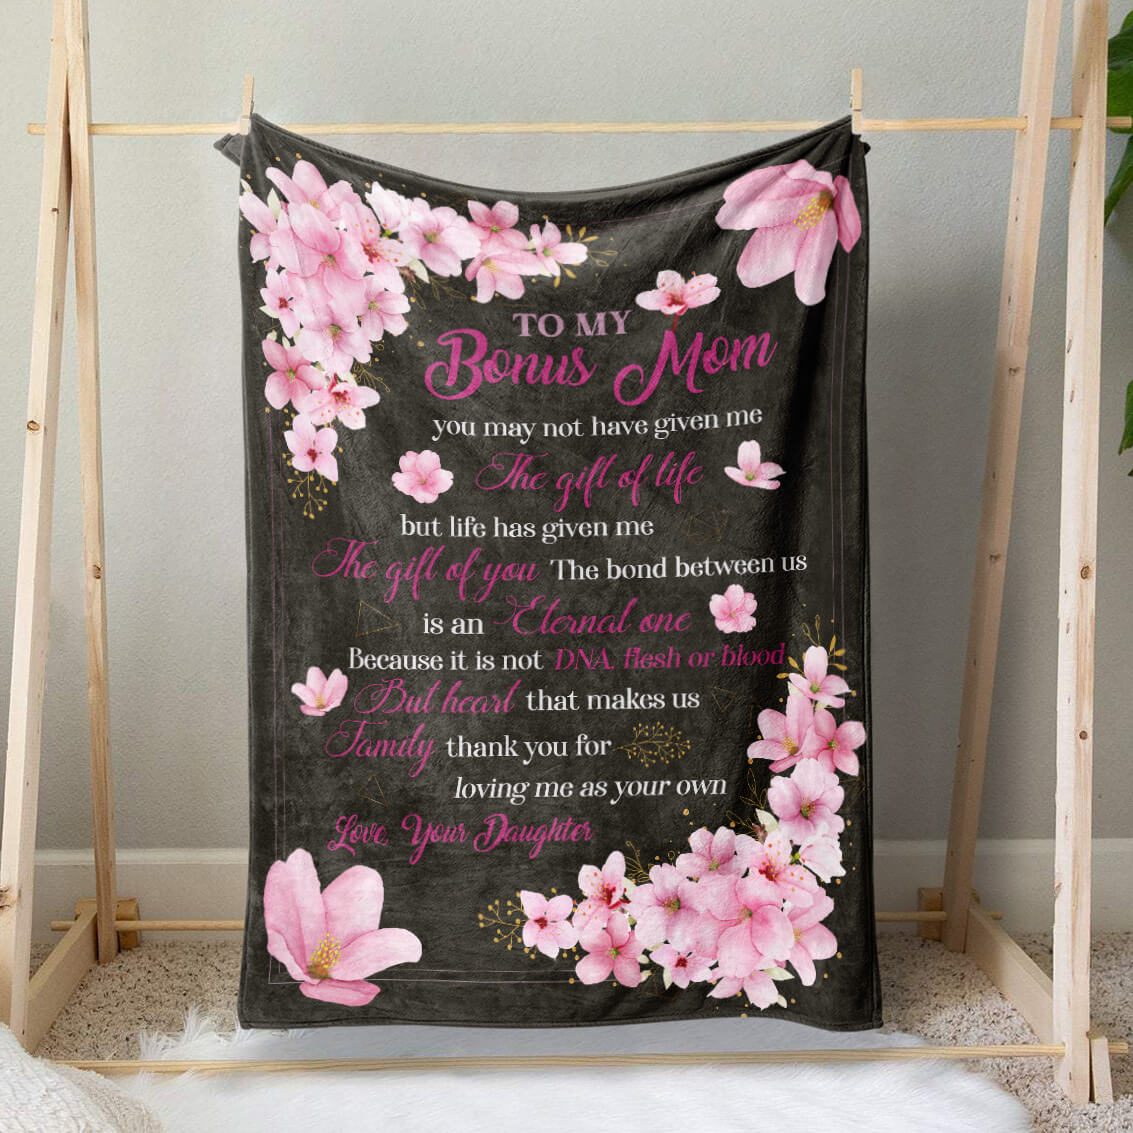 Stepmom Mothers Day Gift Blanket, To My Bonus Mom Given Me The Gift of You  Blanket, Step Mothers Day Christmas Gifts, Best Bonus Mom Gifts - Sweet  Family Gift